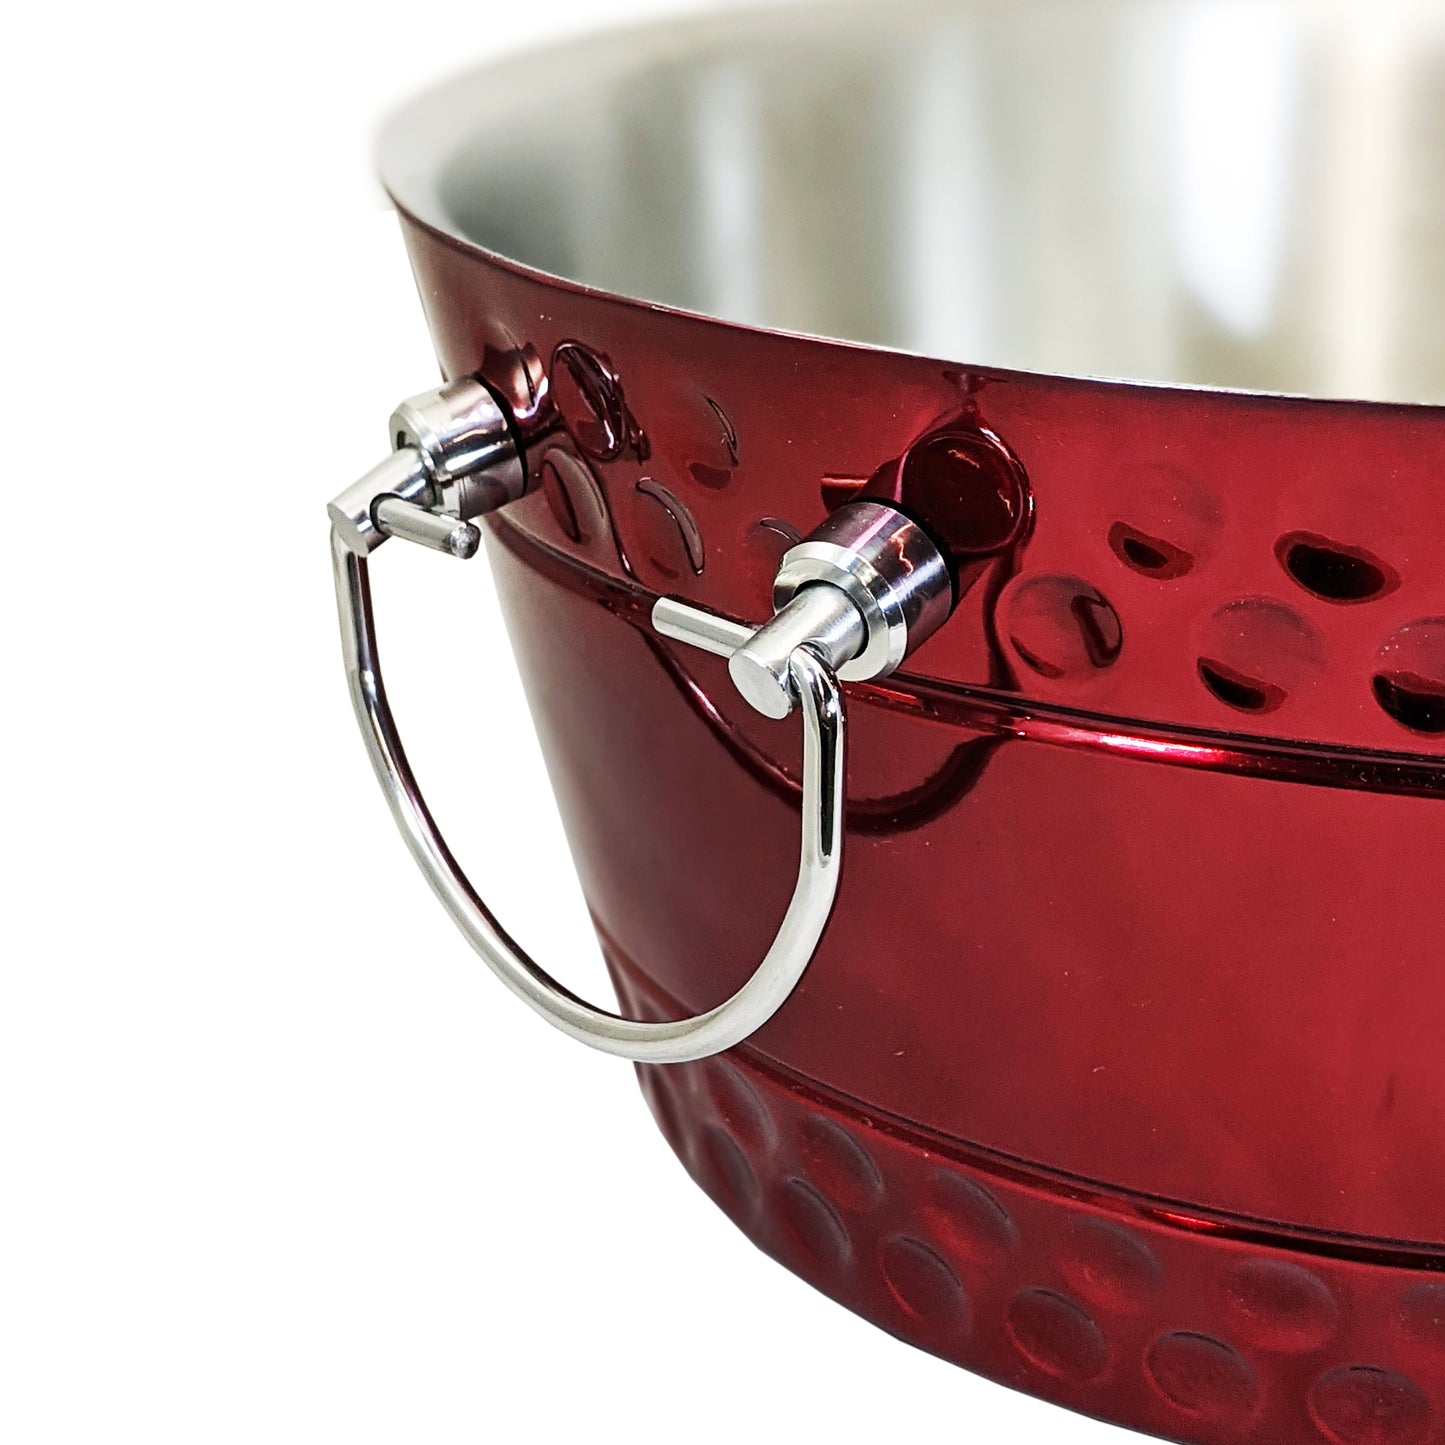 Red drink tub with strong stainless steel hinged handles.  Red glossy exterior with hammering.  Brushed stainless steel inside with no leaking and no party tub condensation mess.